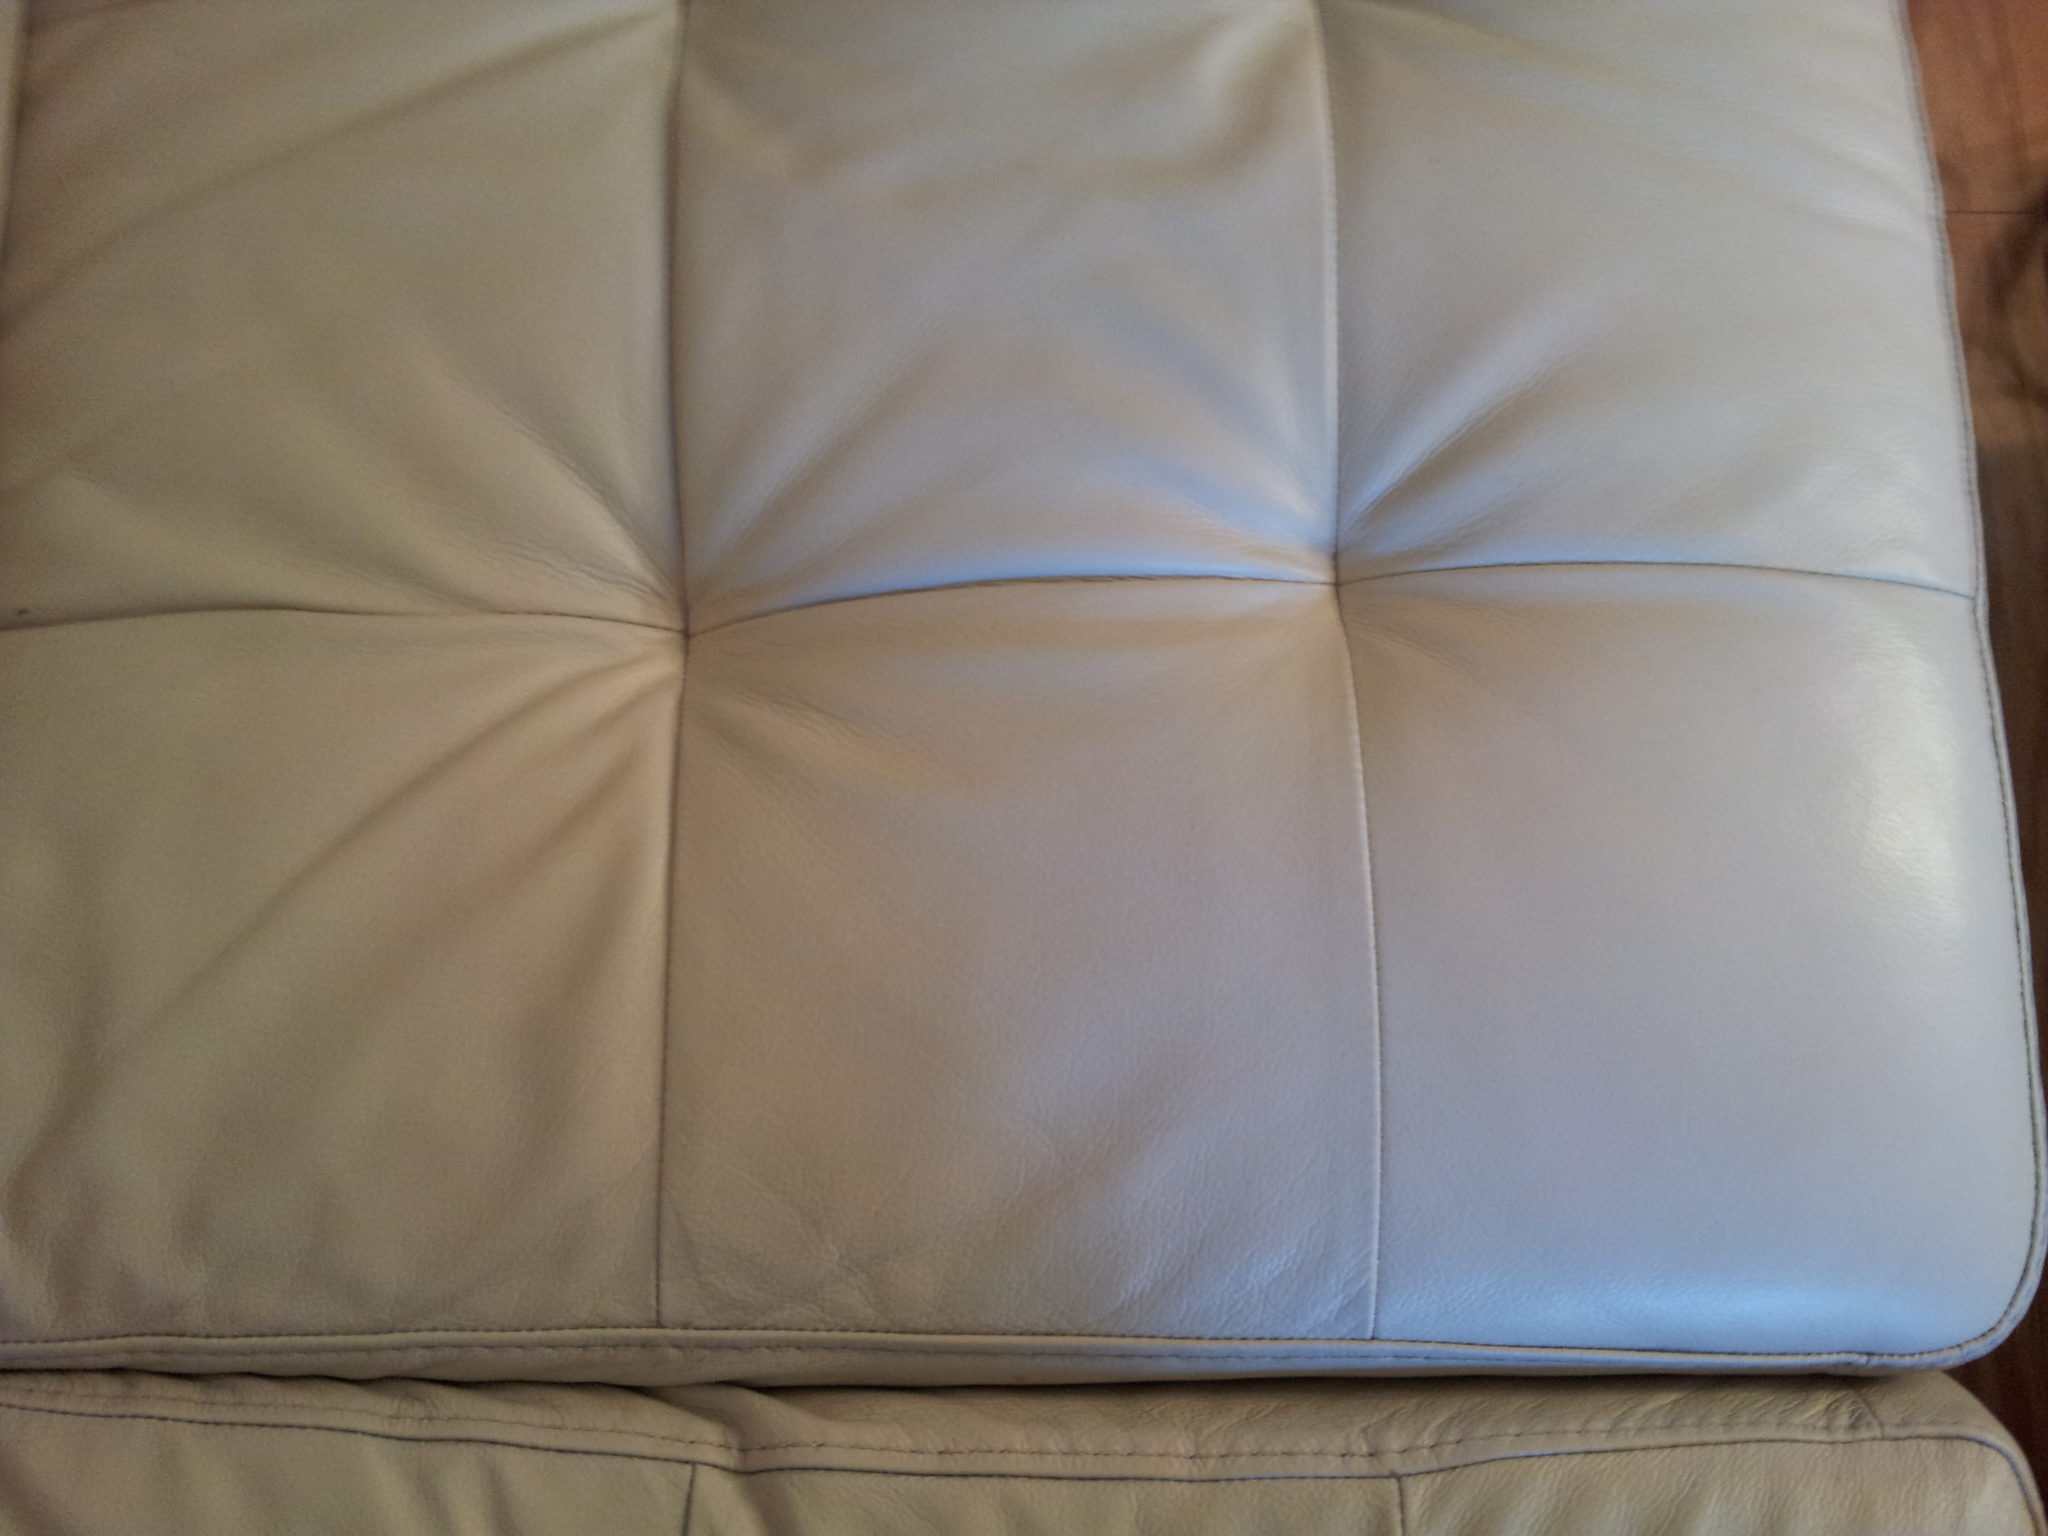 Tampa Furniture Cleaner for Fine Fabrics & Leather